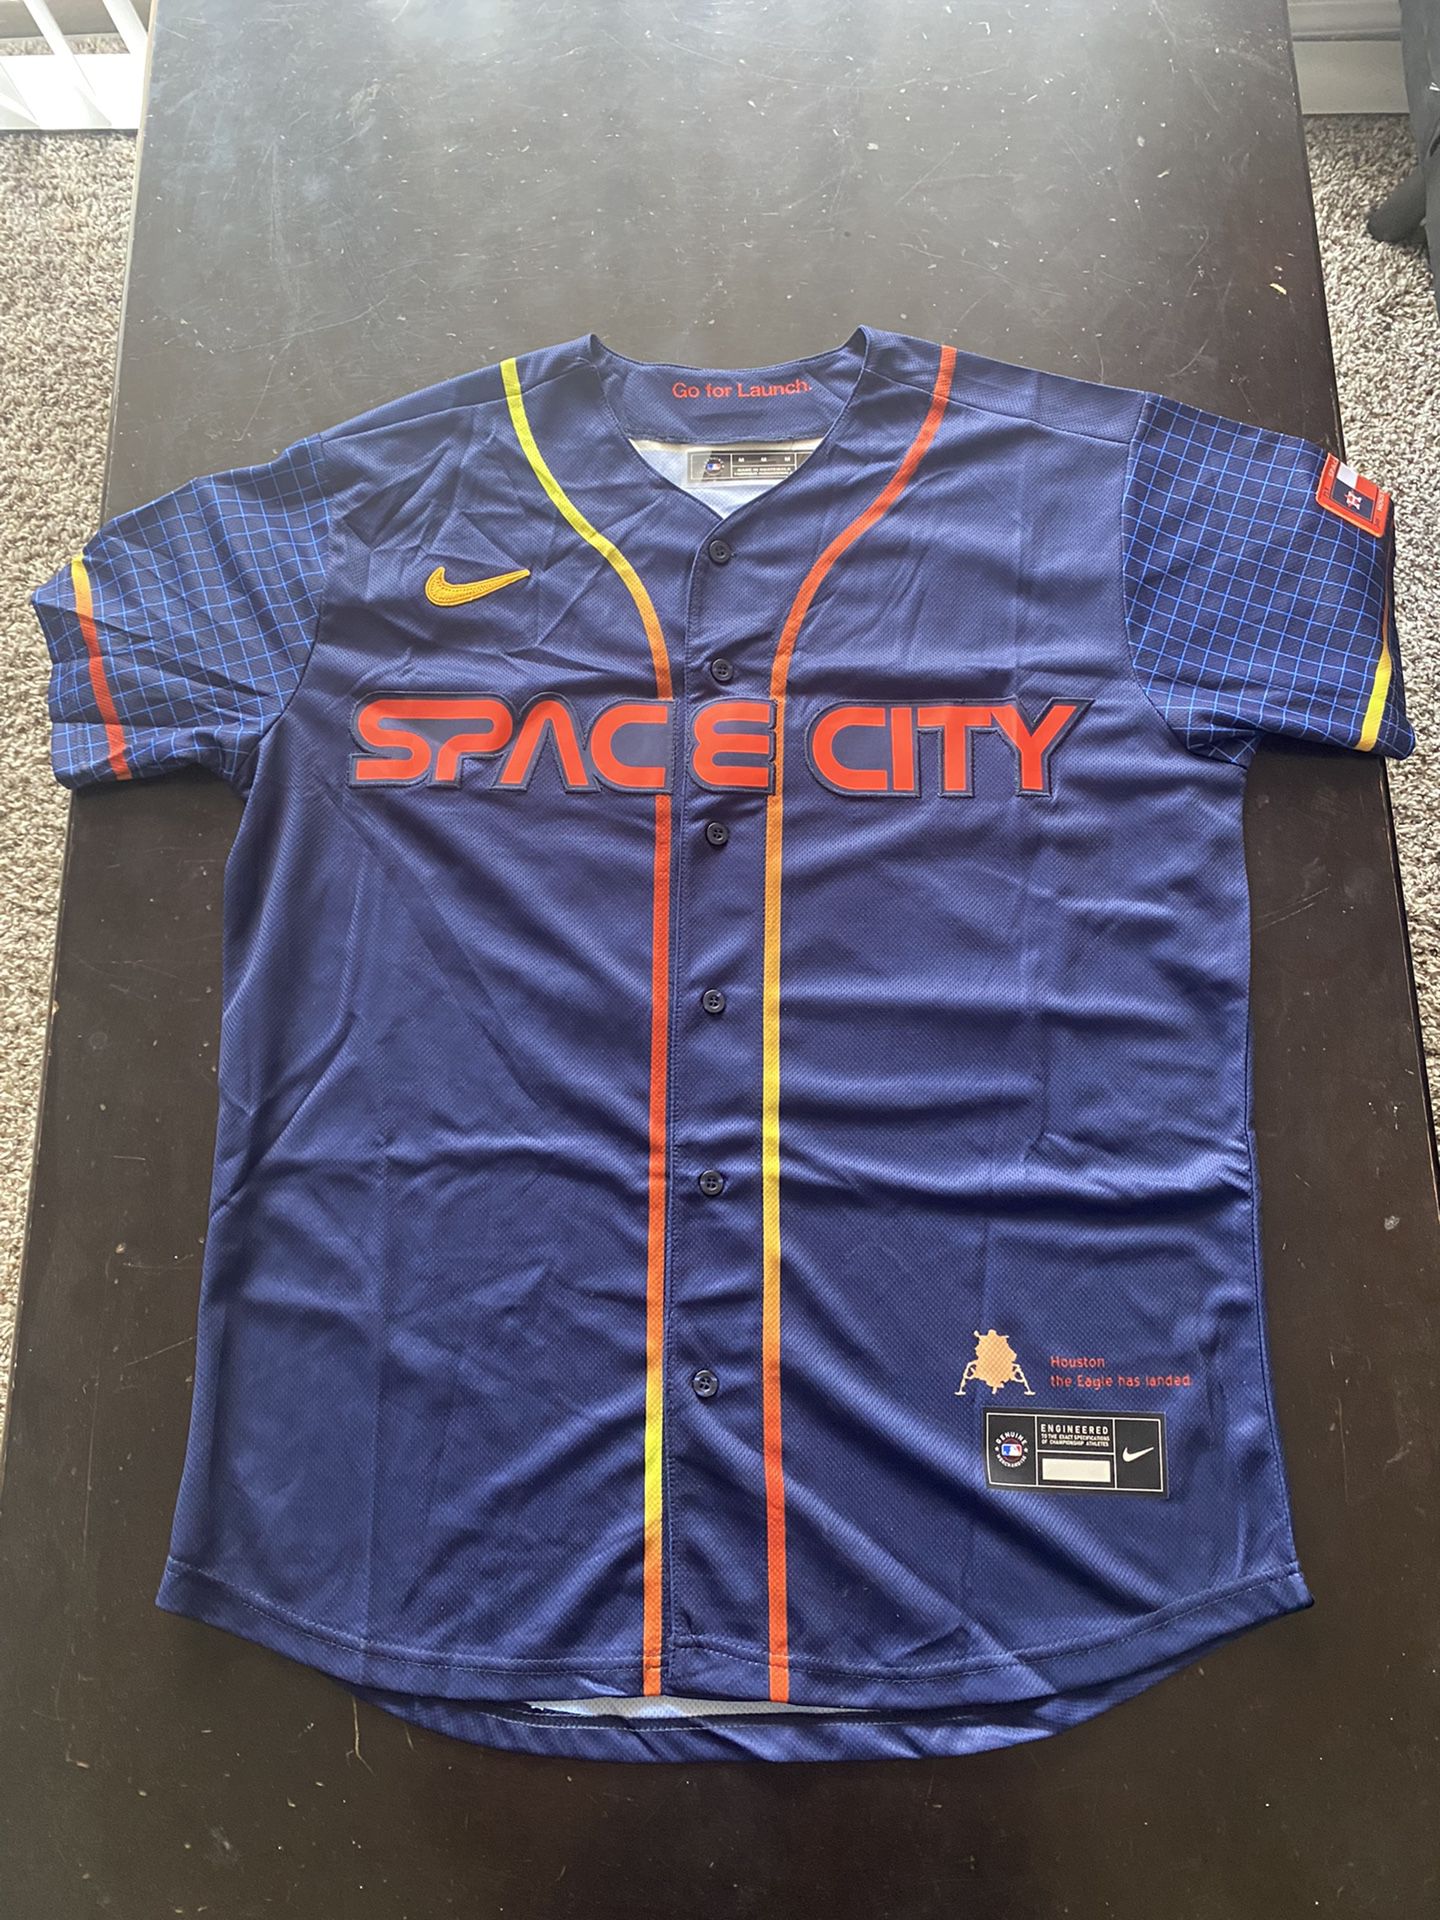 Jose Altuve #27 Space City Astros Jersey for Sale in Houston, TX